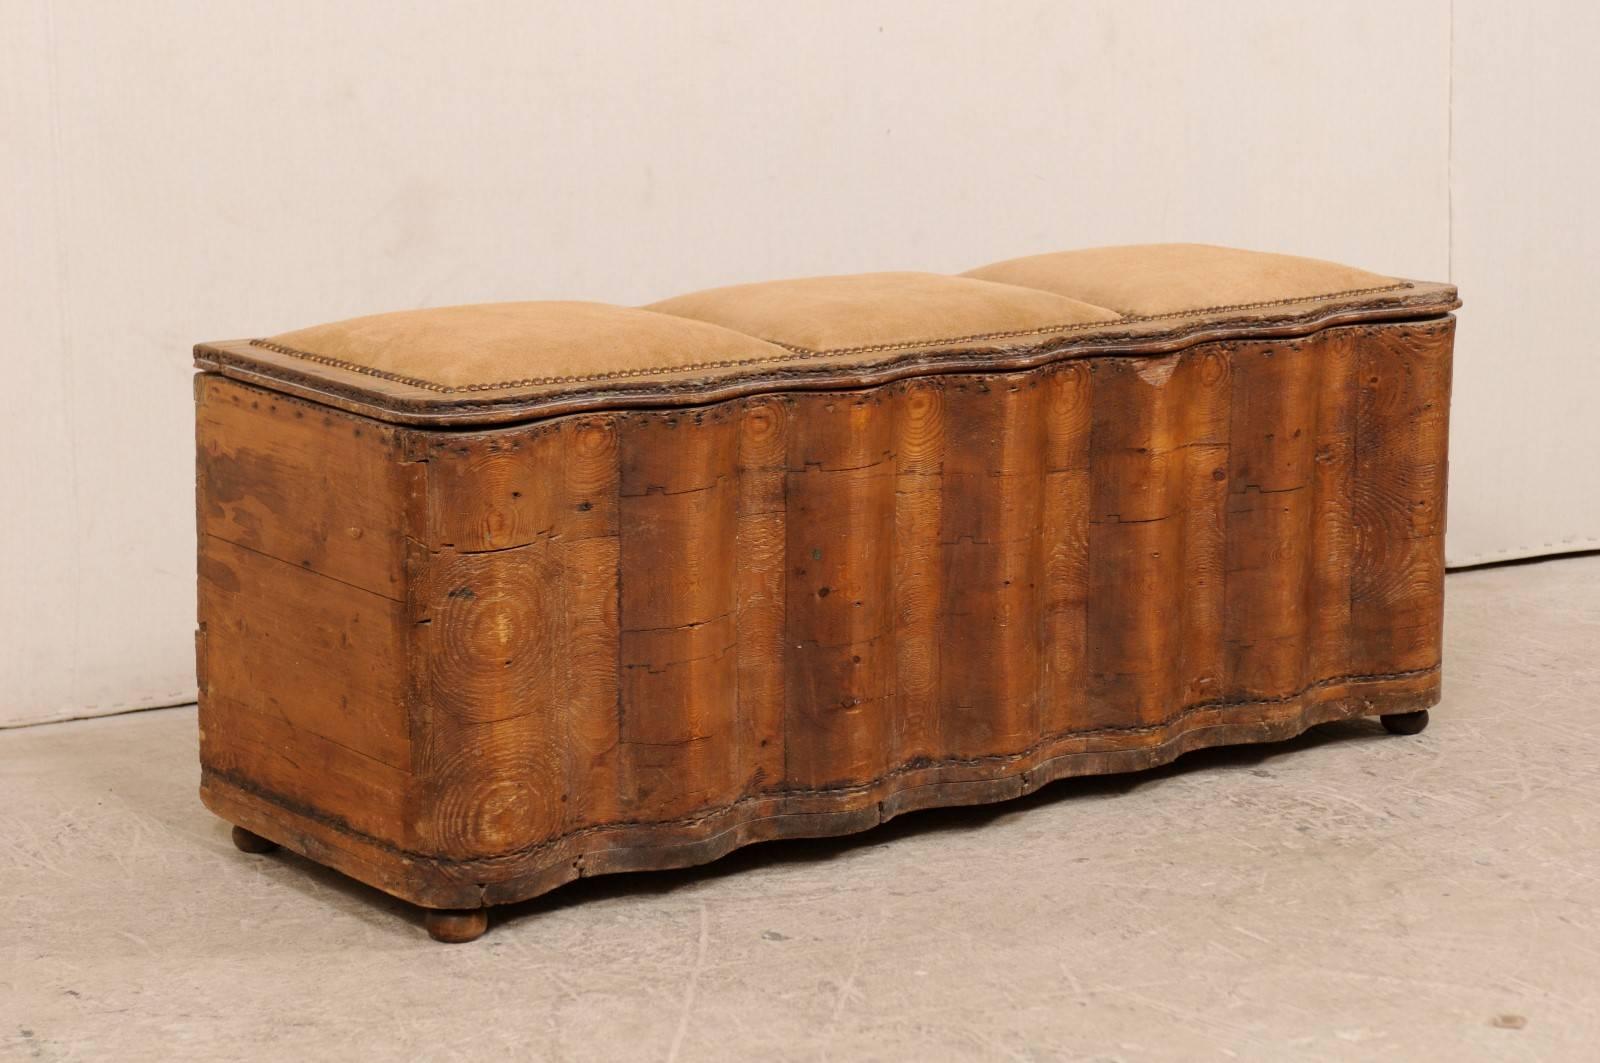 Carved Italian Early 19th Century Undulating Wood Bench with Storage and Suede Top